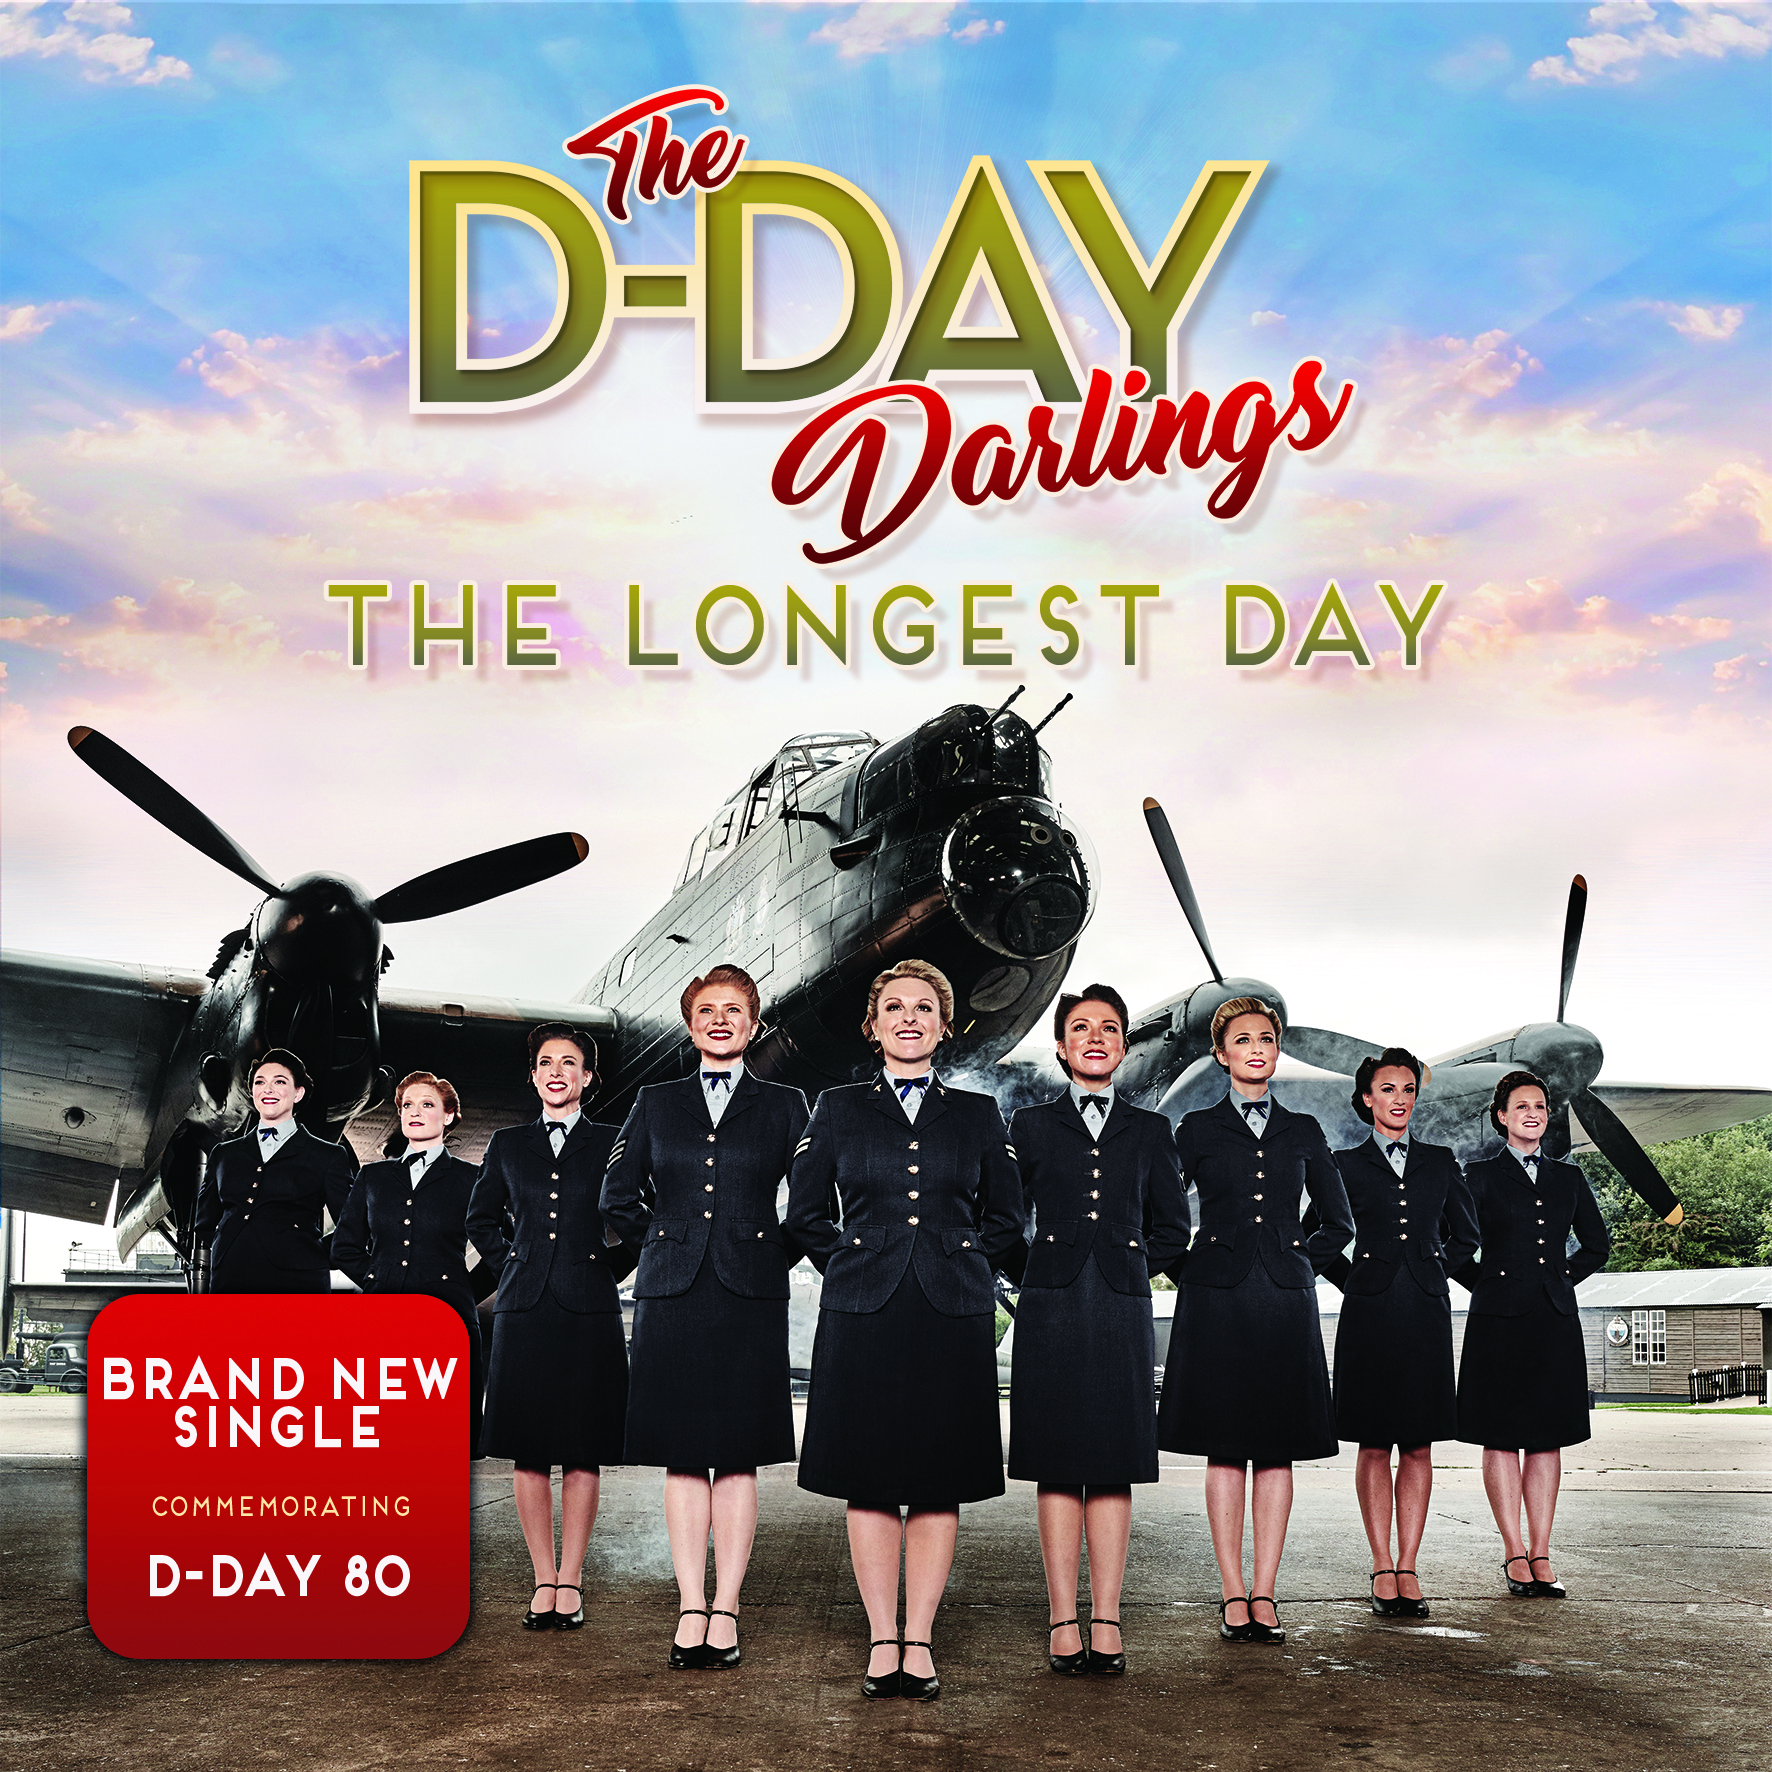  BRITAIN’S GOT TALENT FINALISTS THE D-DAY DARLINGS ANNOUNCE * NEW SINGLE ‘THE LONGEST DAY’ * MARKING THE 80TH ANNIVERSARY OF D-DAY RELEASED MAY 9TH, 2024 * 19 DATE UK THEATRE TOUR - APRIL-OCT 2024 * * LIMITED EDITION GIN ‘I’LL REMEMBER YOU’ * 